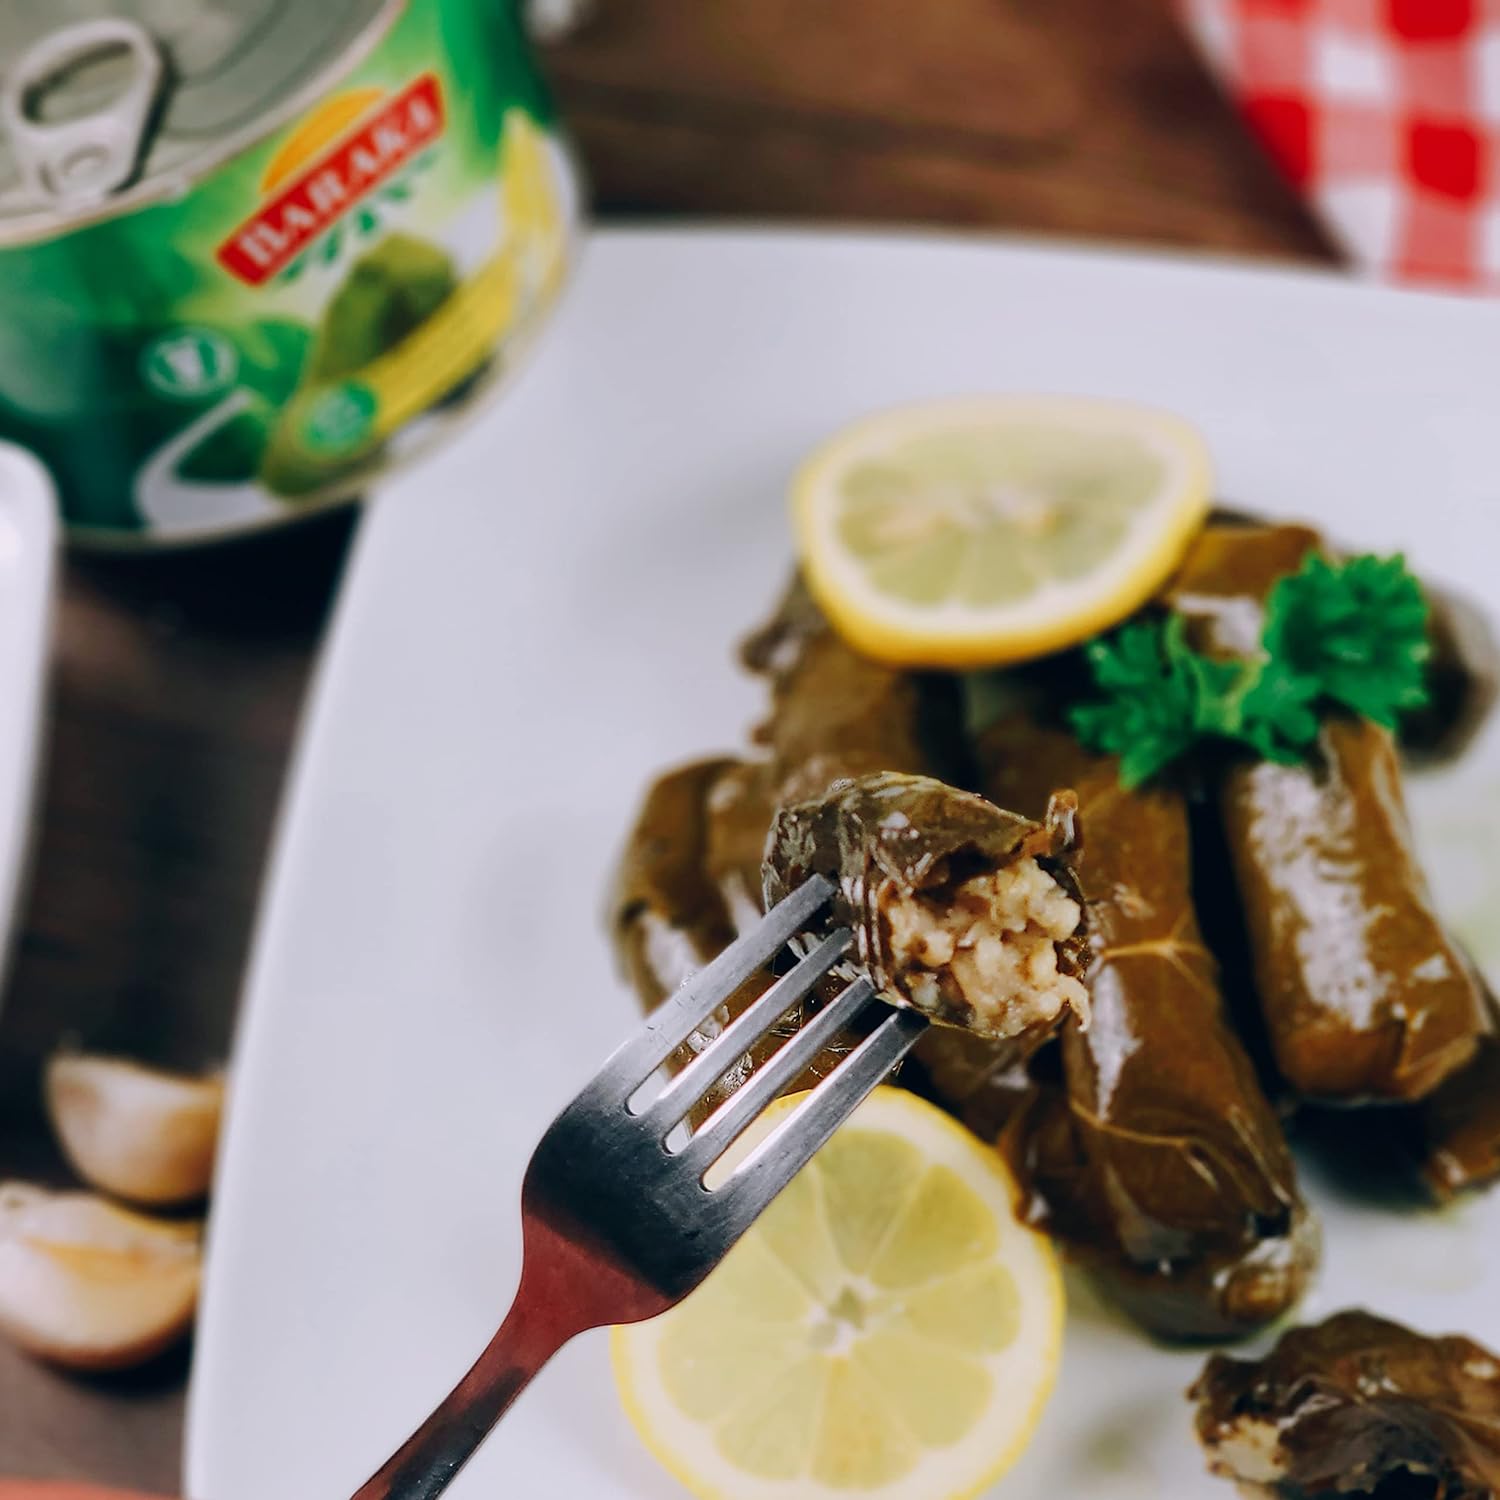 Baraka Dolmas Stuffed Grape Leaves Canned | Ready to Eat Turkish Grape Leaves Stuffed with Rice & Herbs | Vegan, Vegetarian, No Meat Middle Eastern Snack Food Imported from Turkey (14 oz Can)